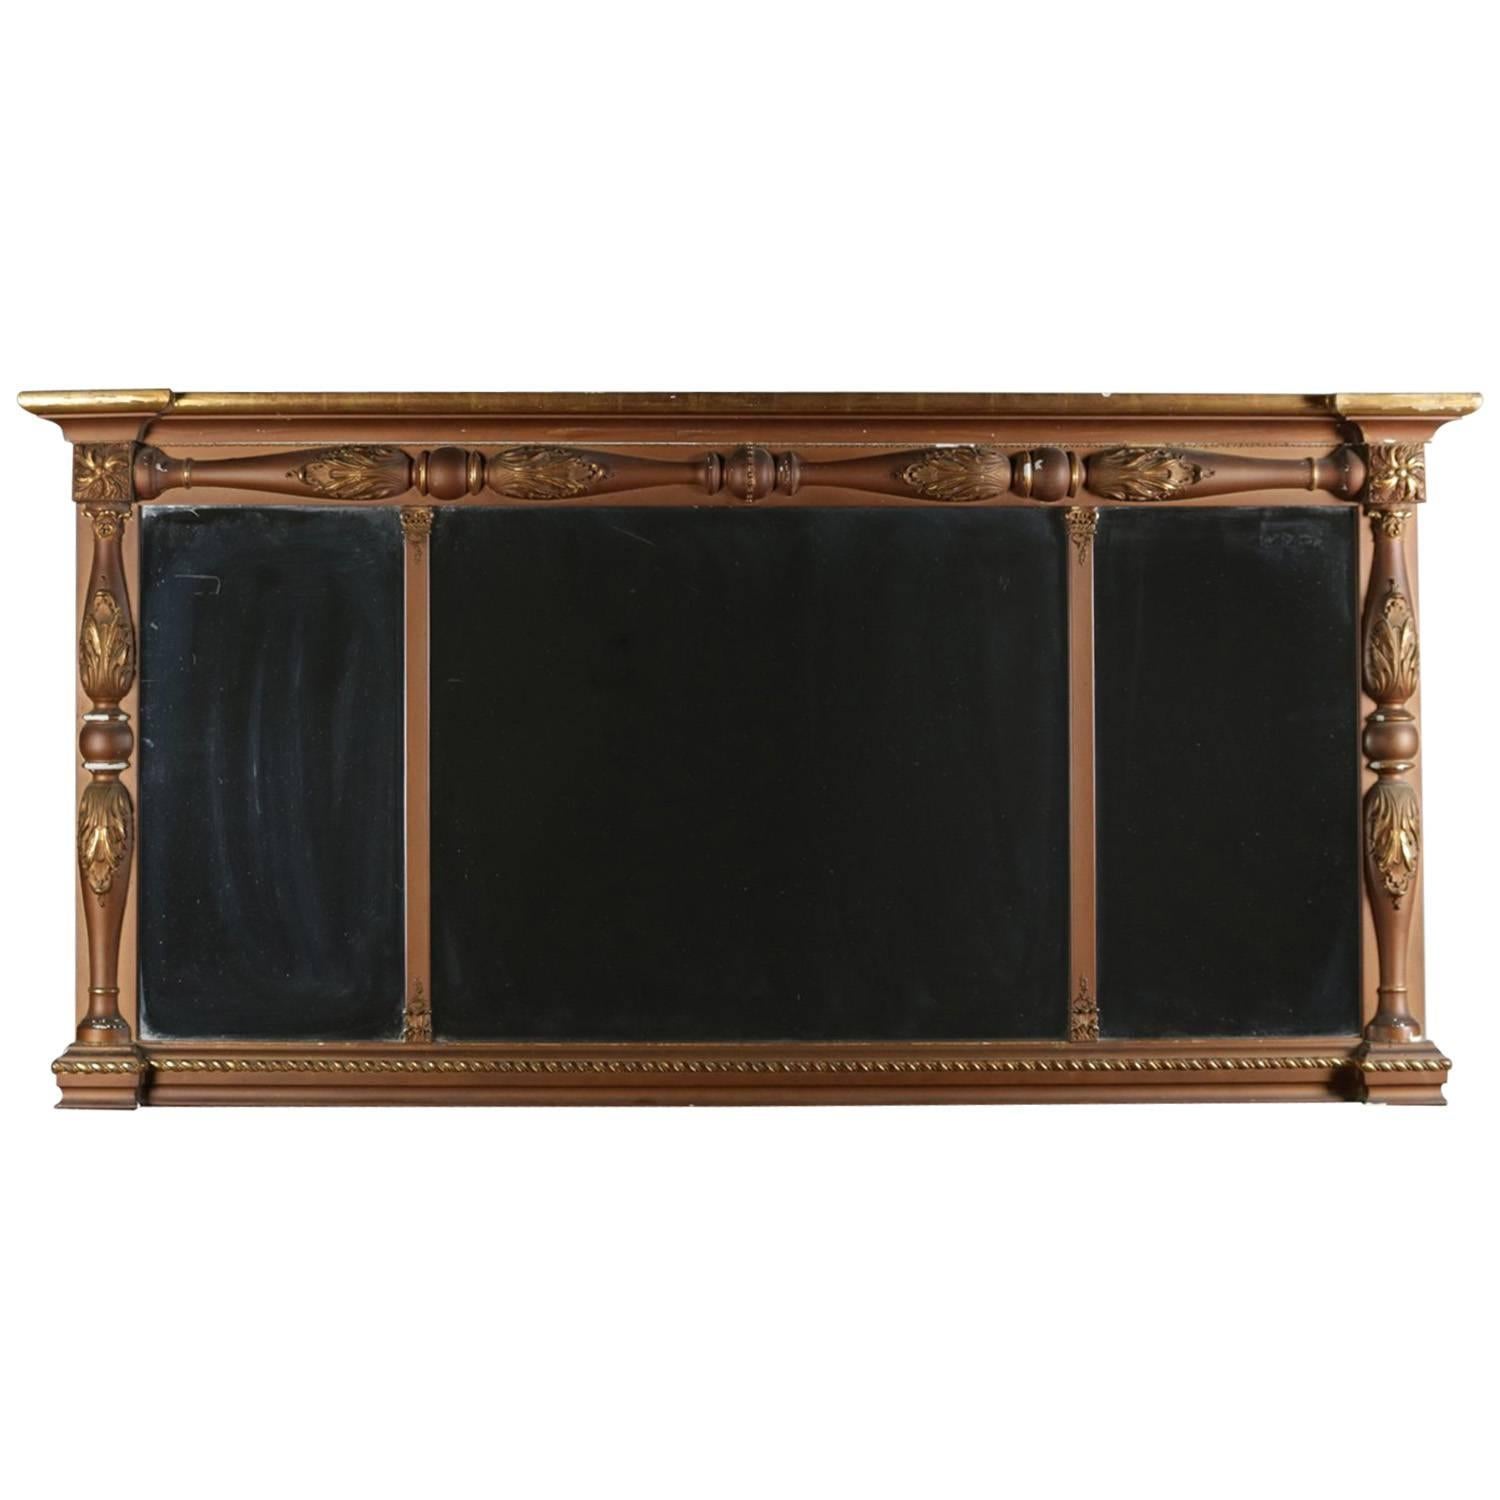 Empire Gilt Classical and Foliate Carved Triptych over Mantel Mirror For Sale